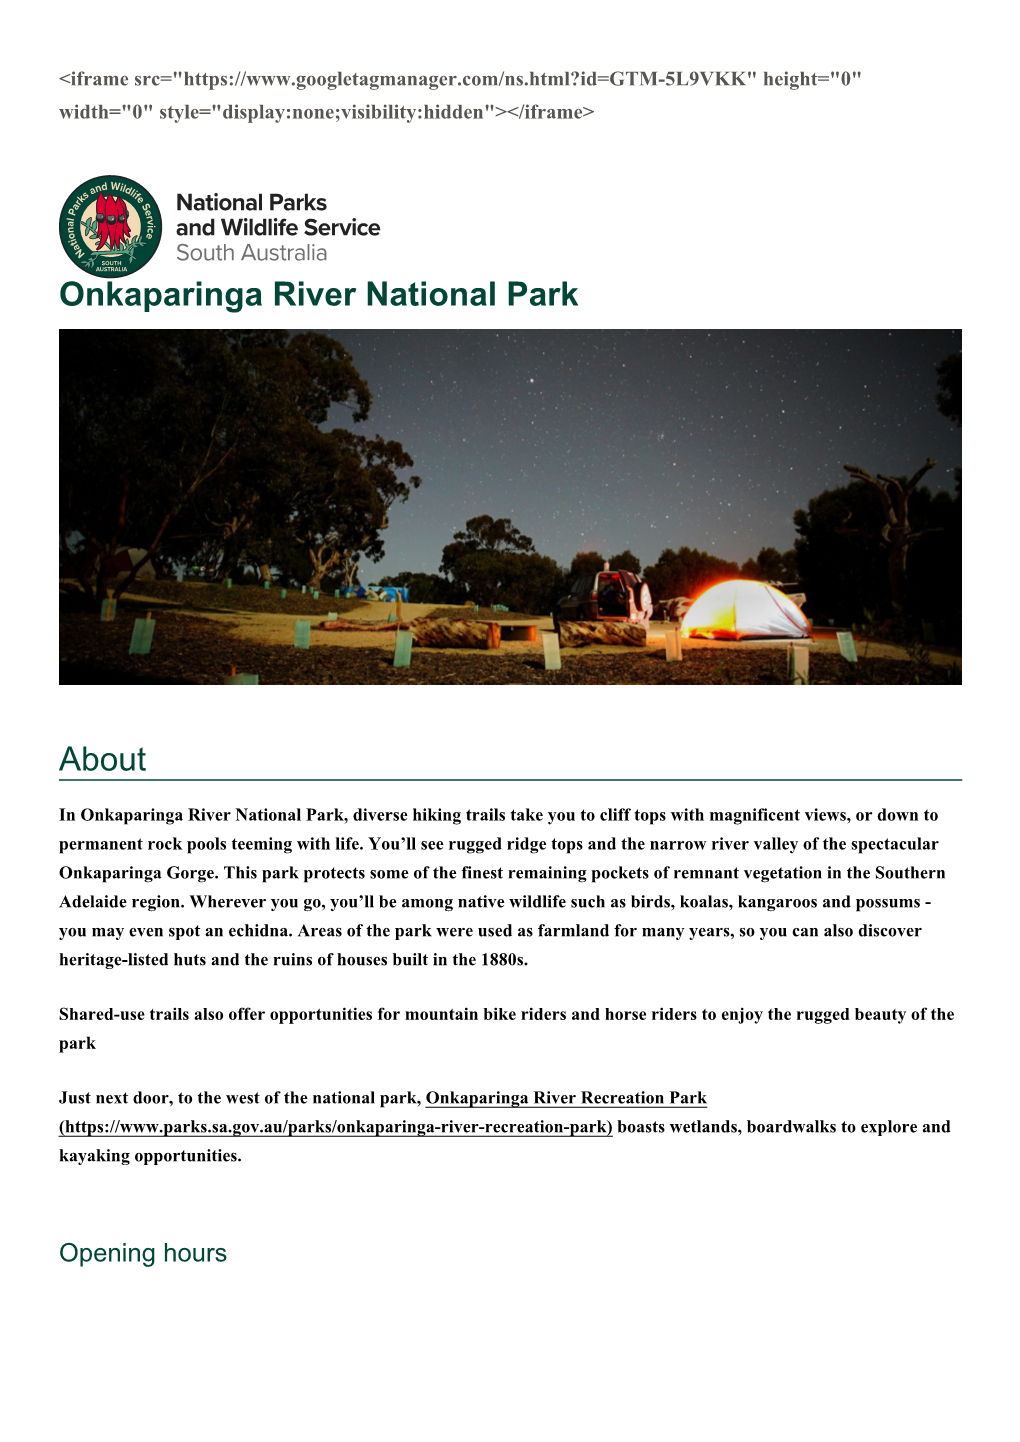 Onkaparinga River National Park About